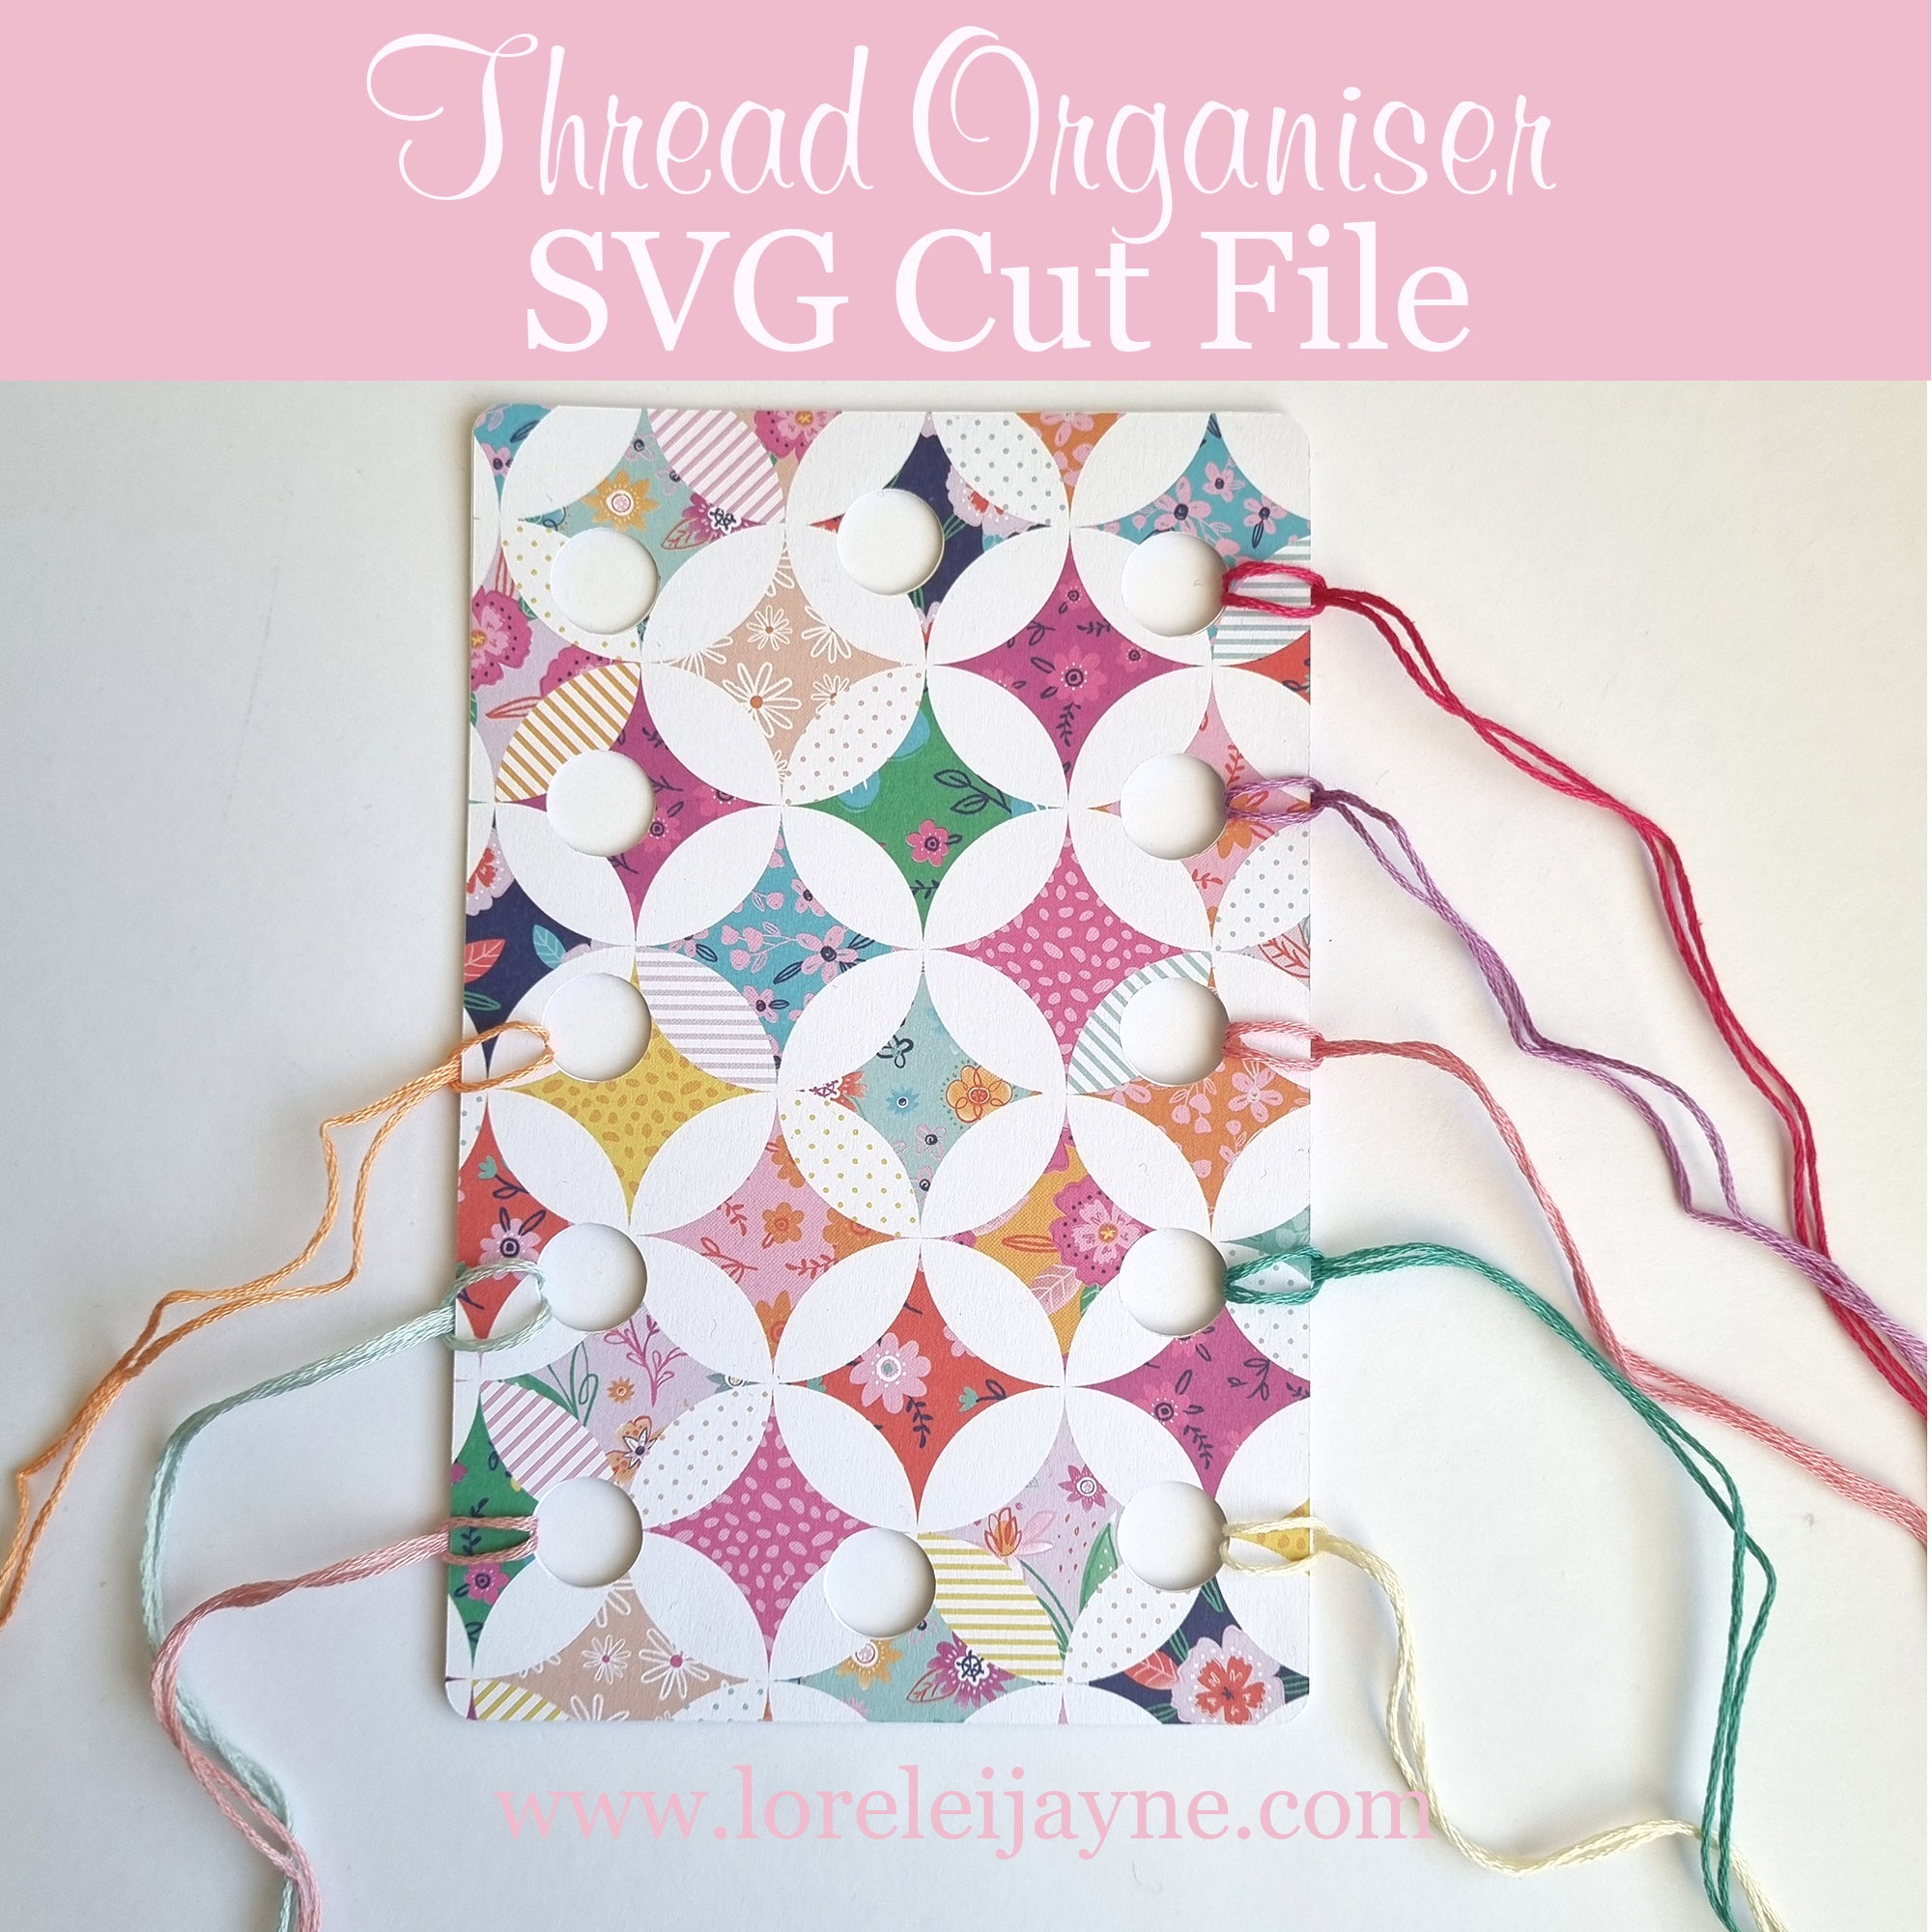 Embroidery Floss Organiser SVG File, 2 sizes included